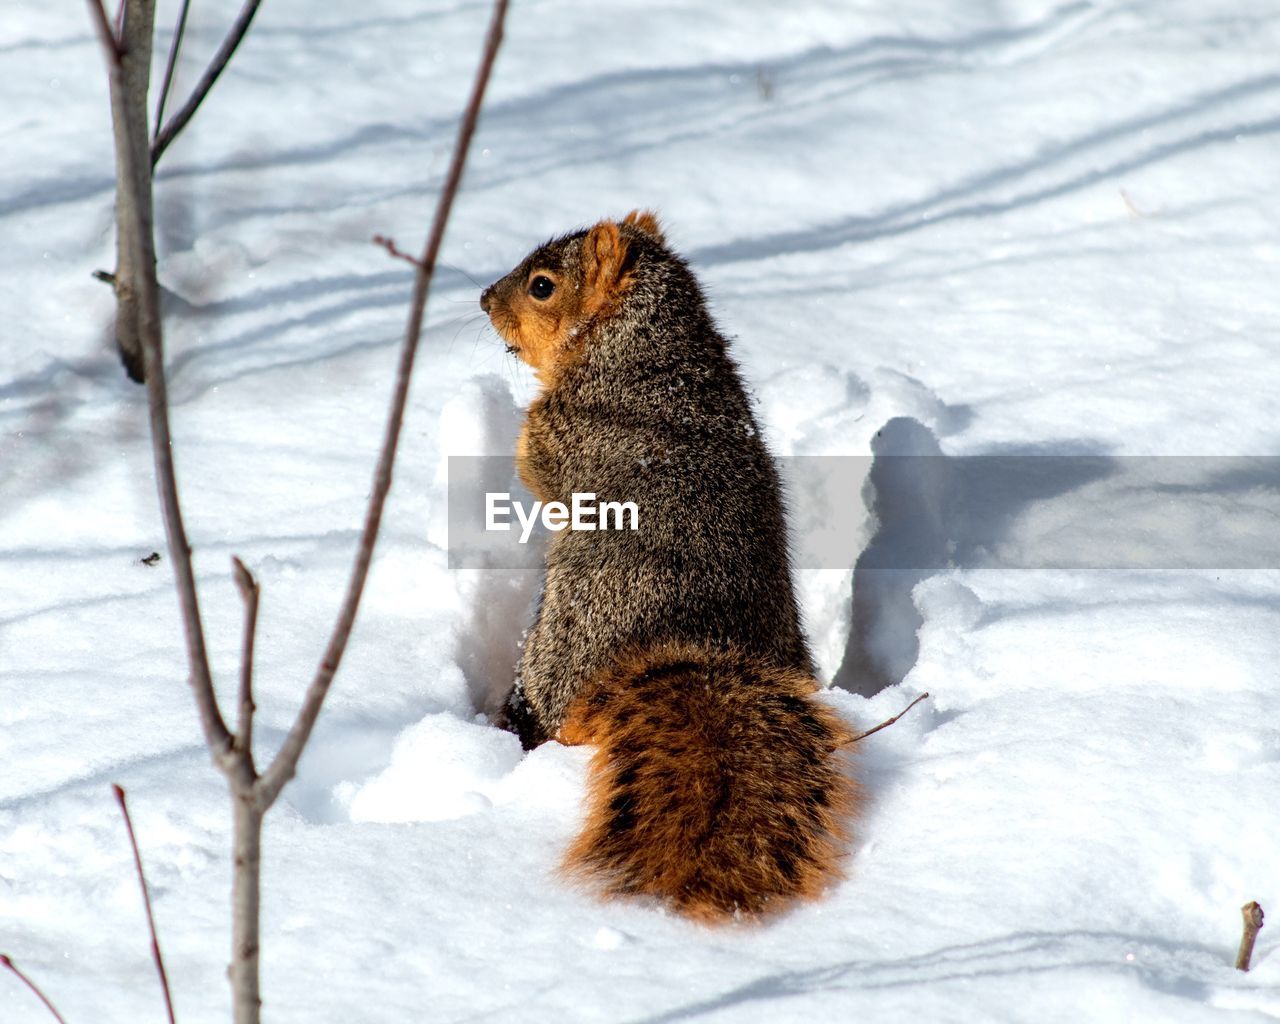 VIEW OF SQUIRREL ON SNOW COVERED FIELD